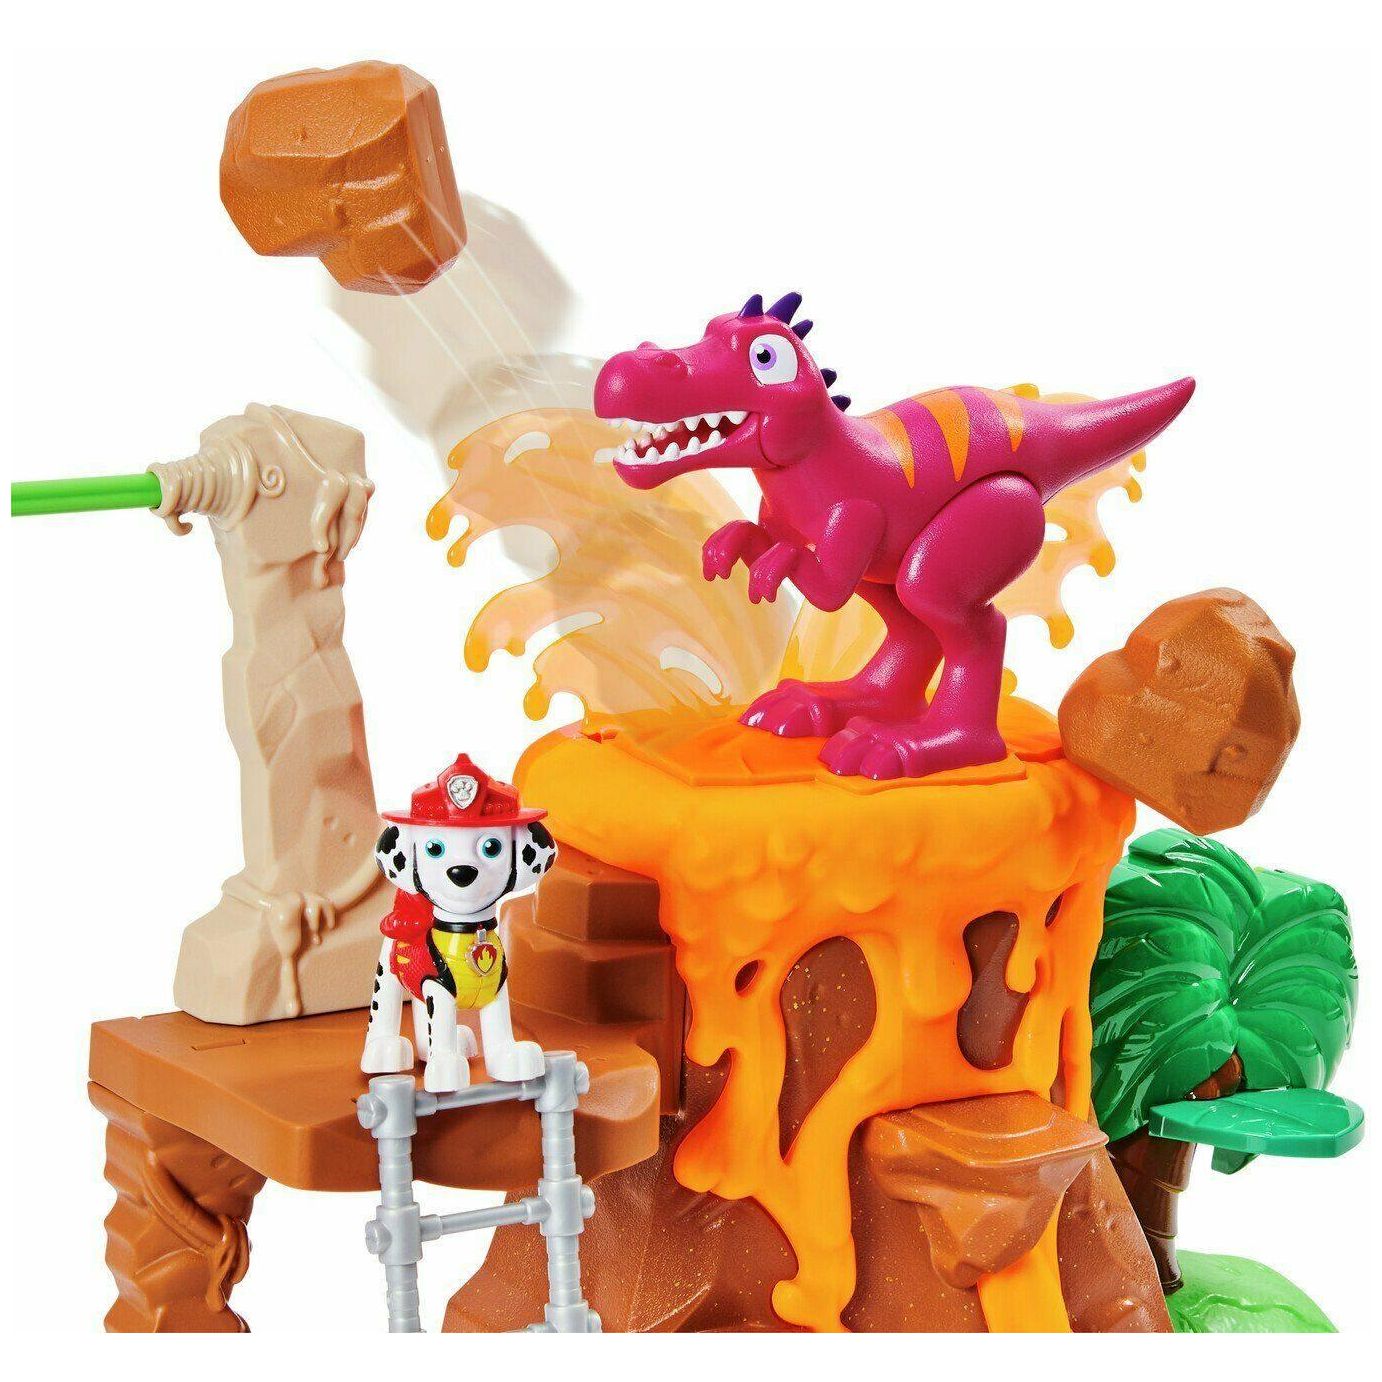 Spin Master PAW Patrol Dino Rescue Volcano Playset With Marshall Figure - BumbleToys - 5-7 Years, Arabic Triangle Trading, Boys, Paw Patrol, Vehicles & Play Sets